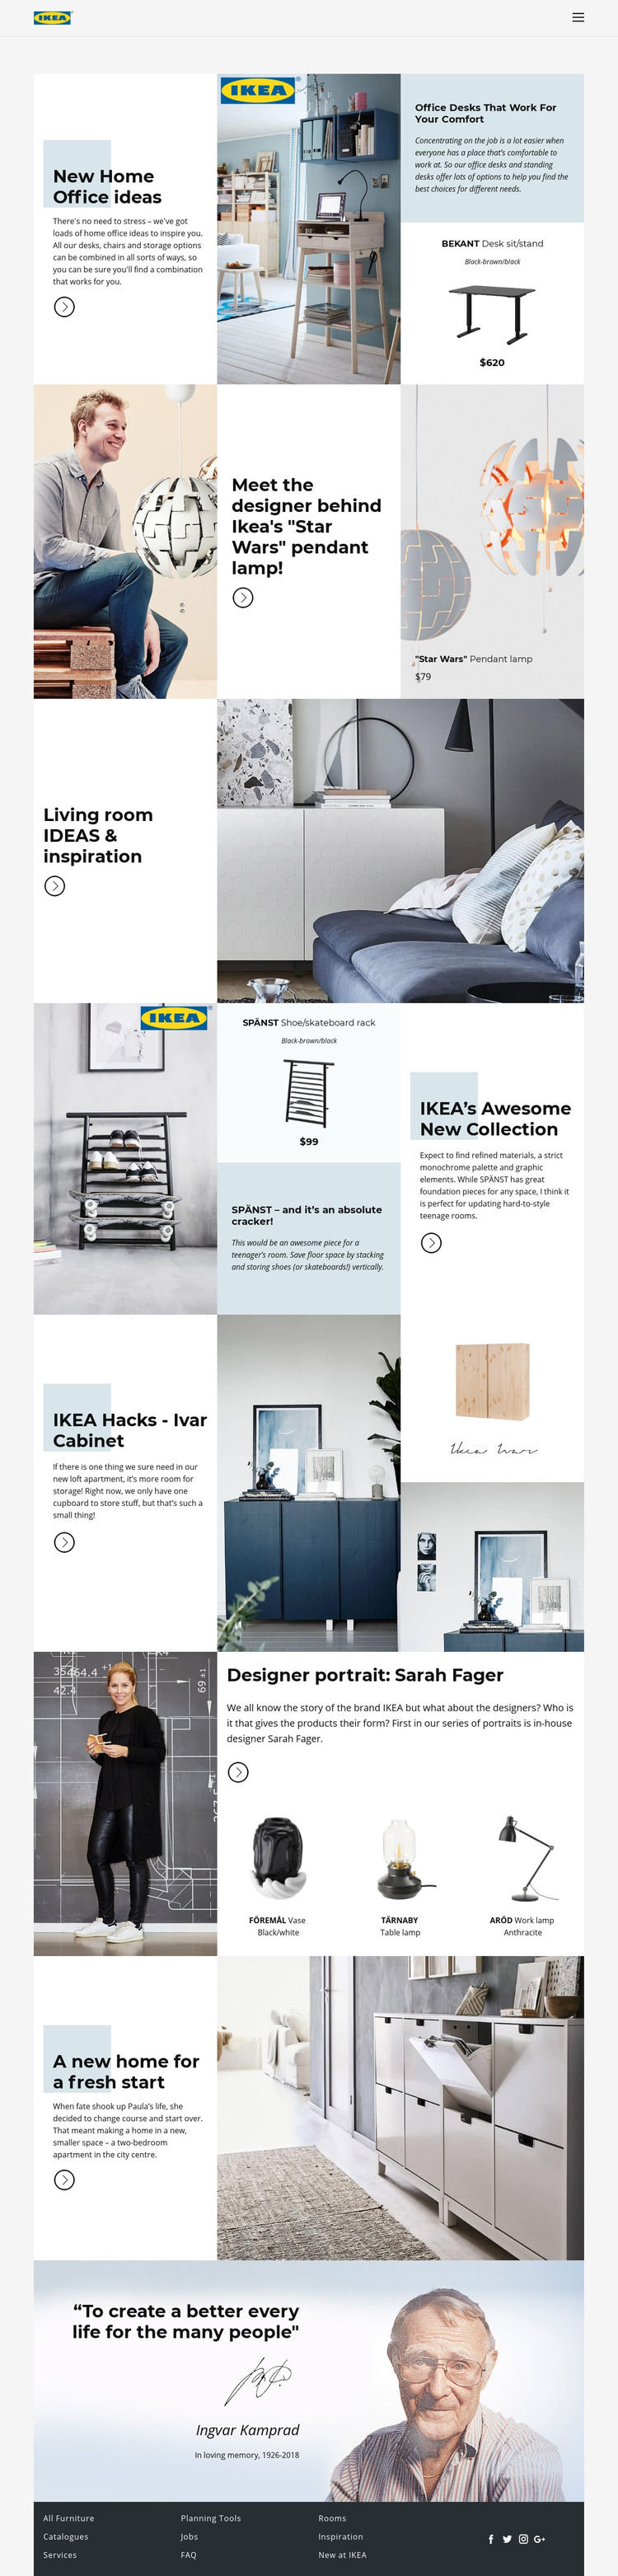 Inspiration from IKEA Homepage Design